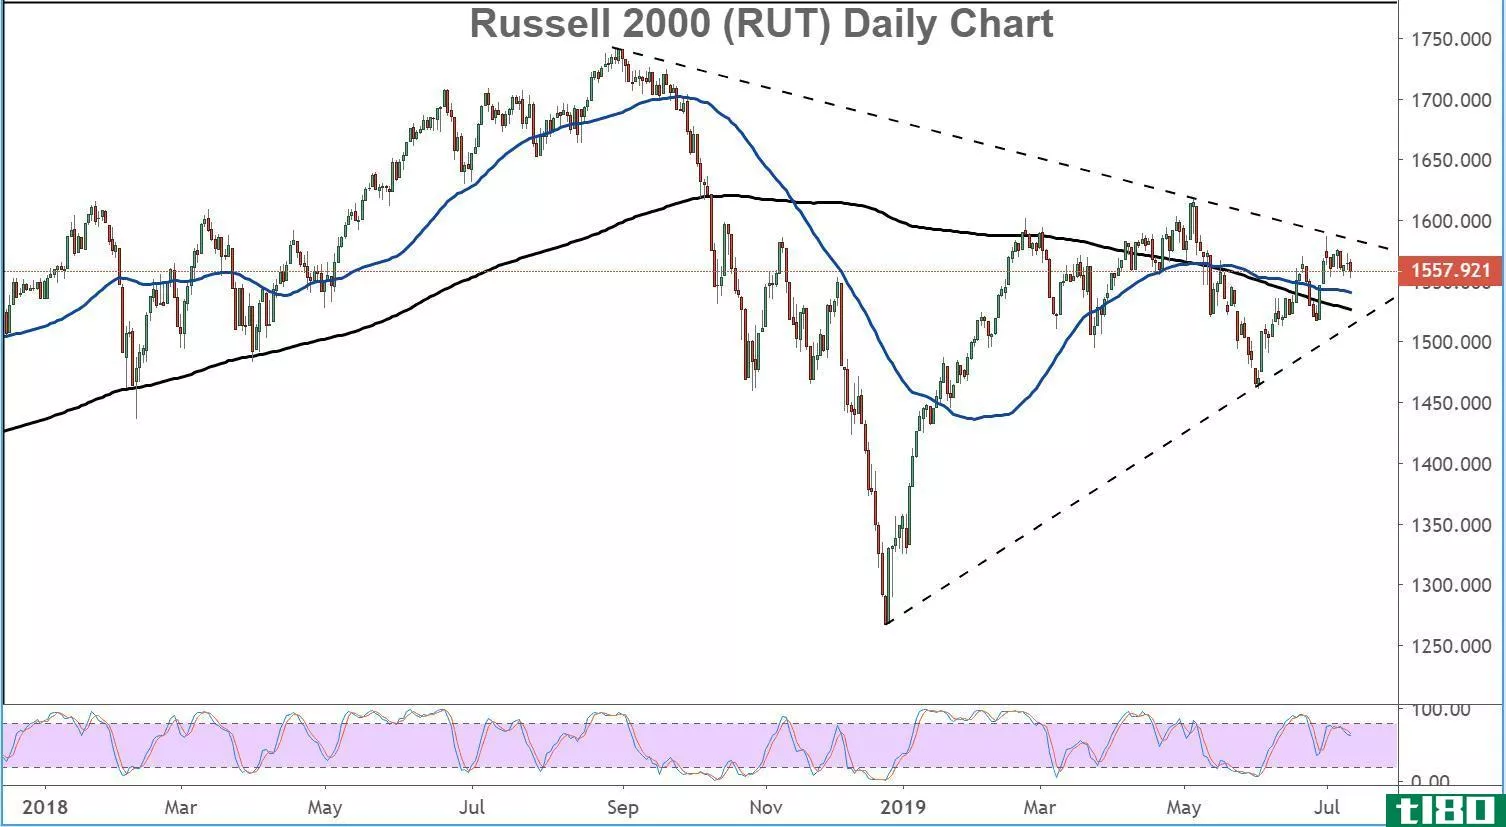 Chart showing the performance of the Russell 2000 Index